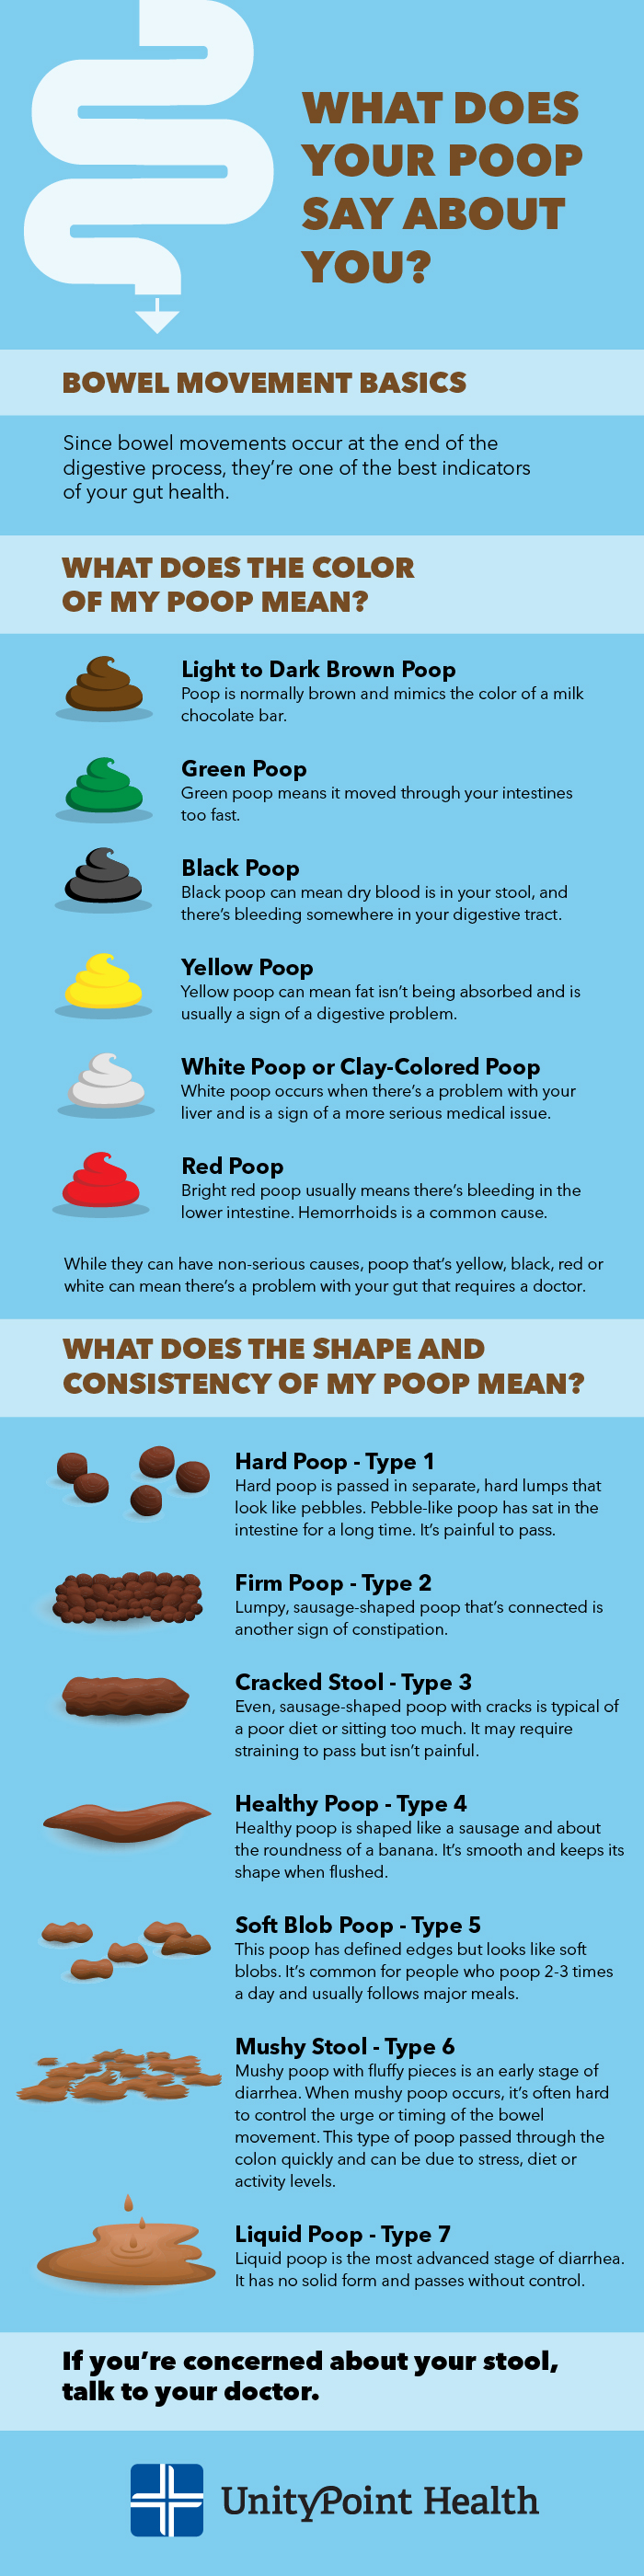 Why Does it Feel Good to Poop?